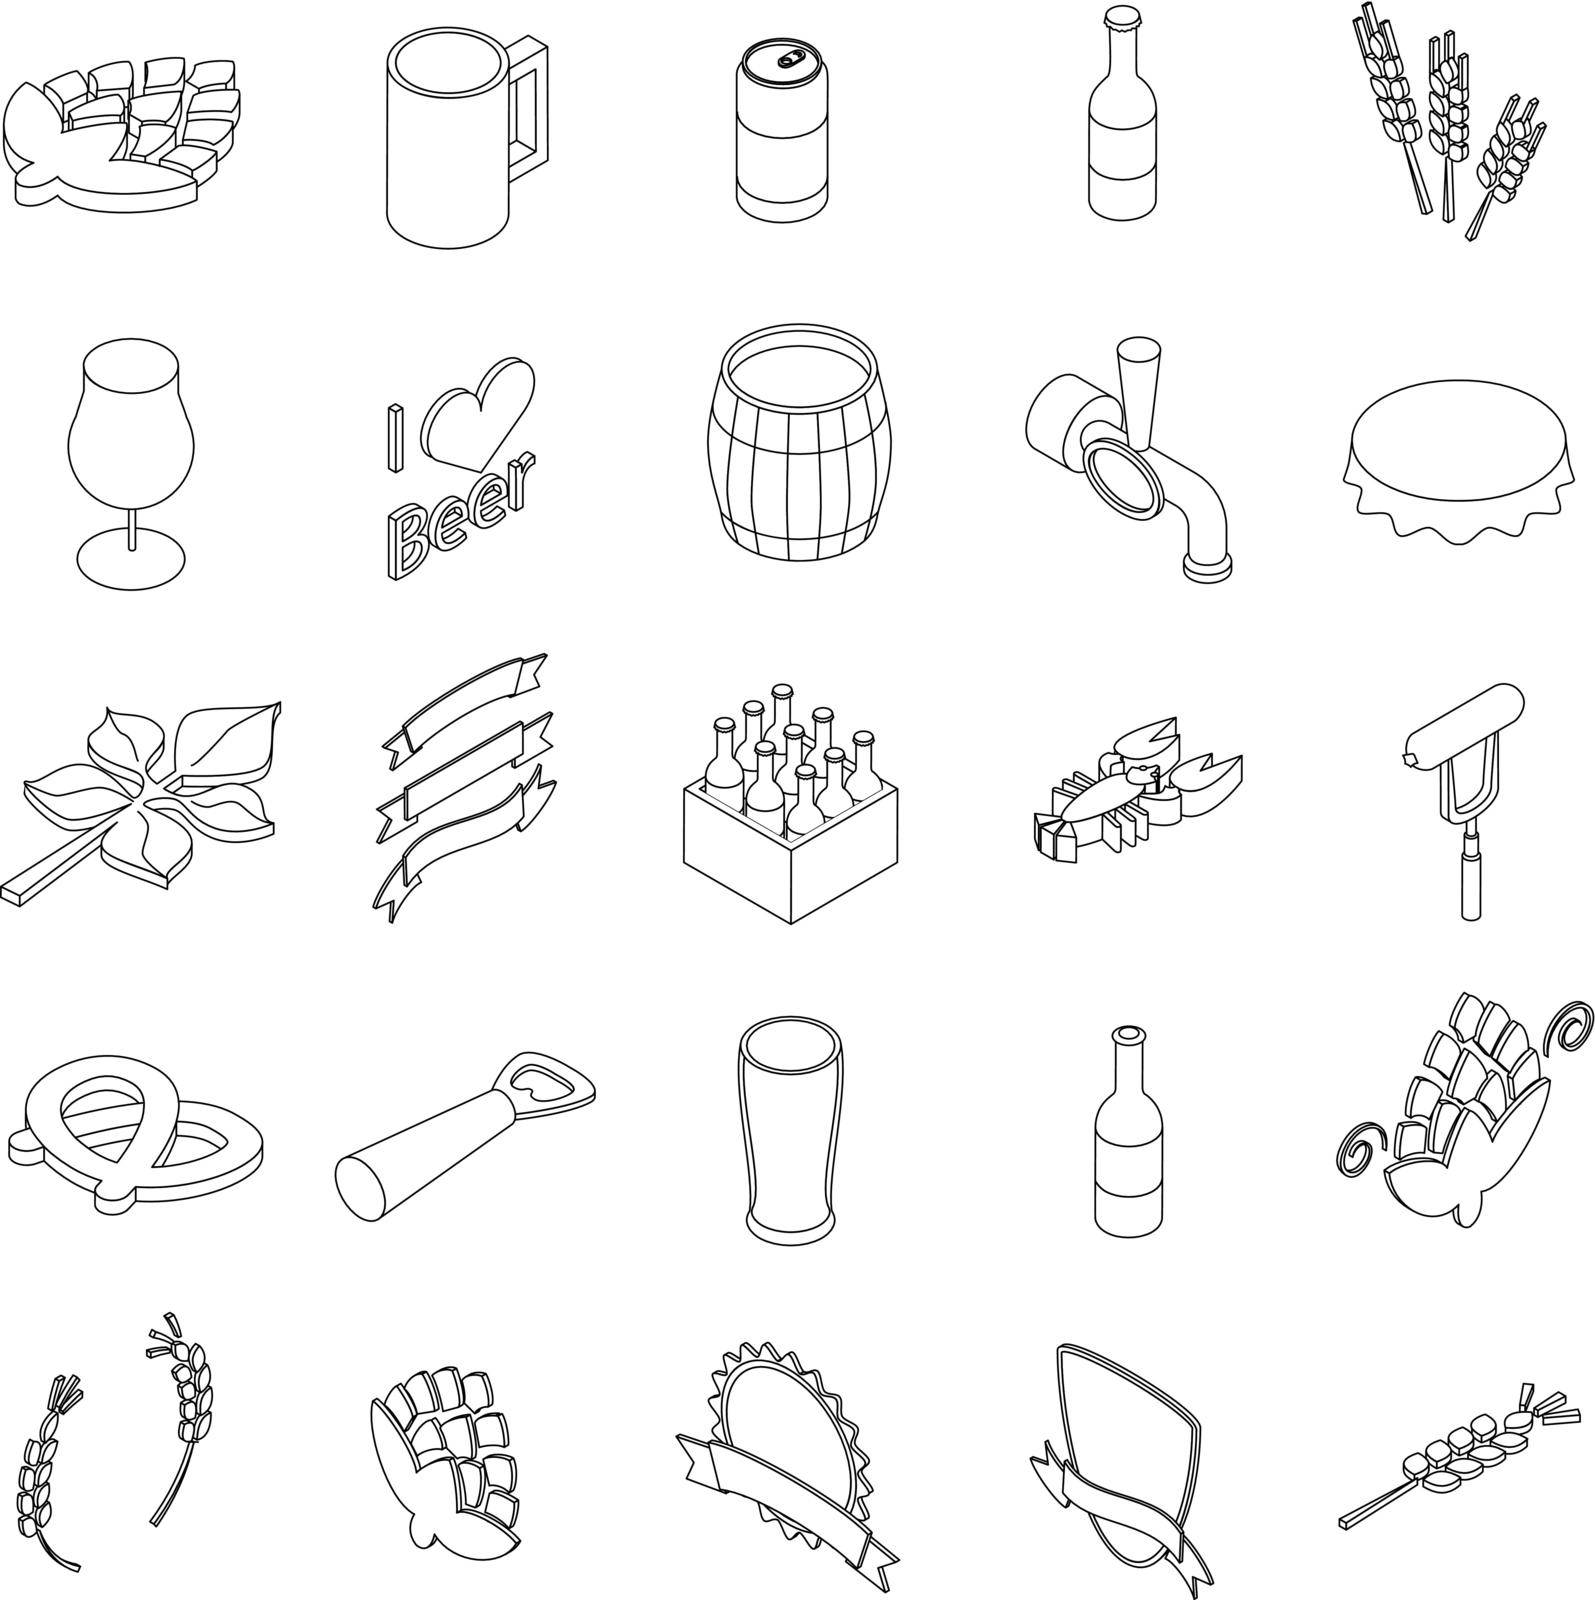 Beer set icons in isometric 3d style isolated on white background